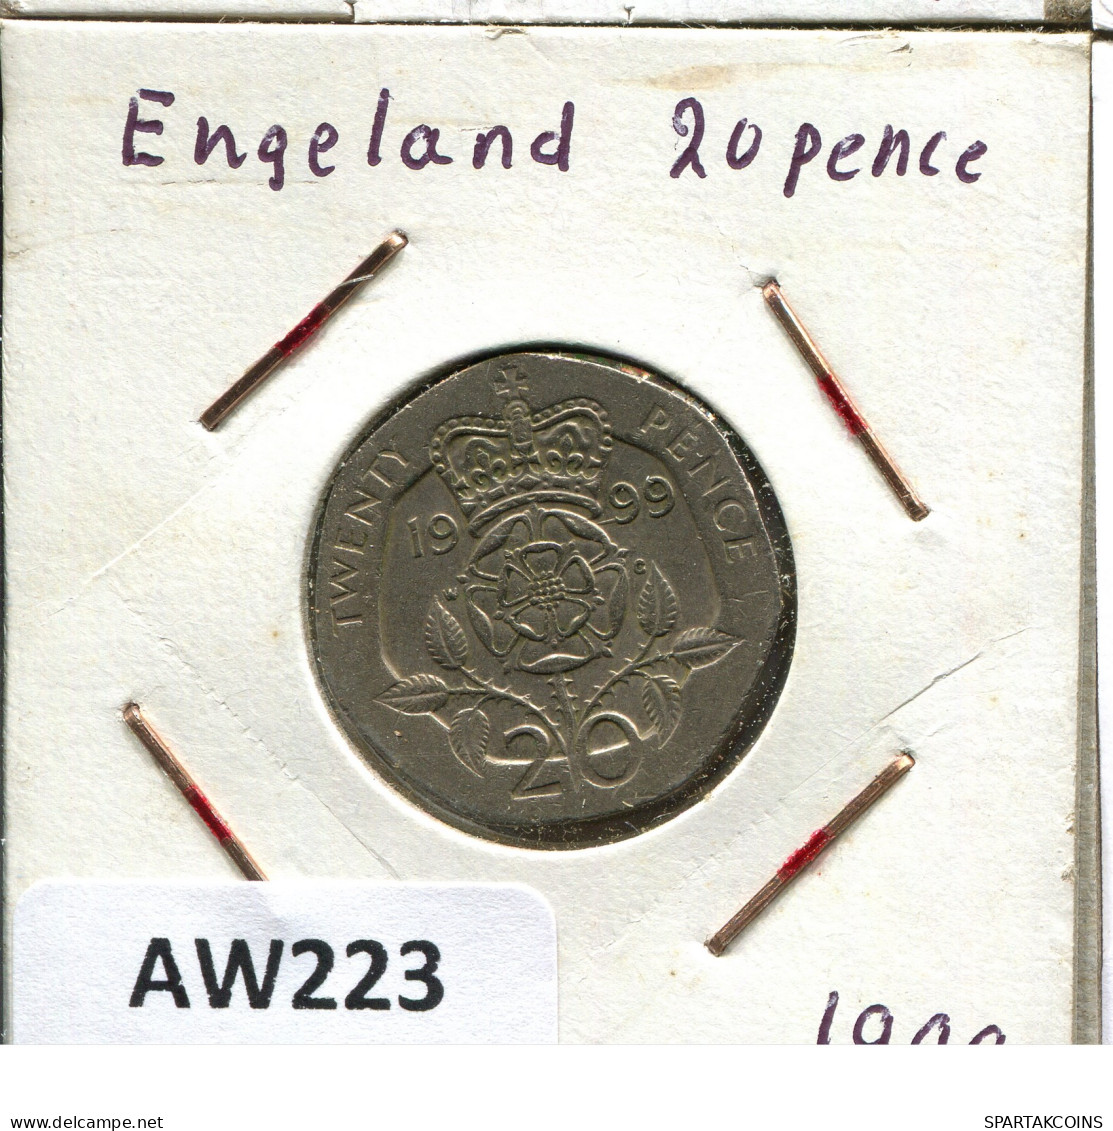 20 PENCE 1999 UK GREAT BRITAIN Coin #AW223.U - 20 Pence